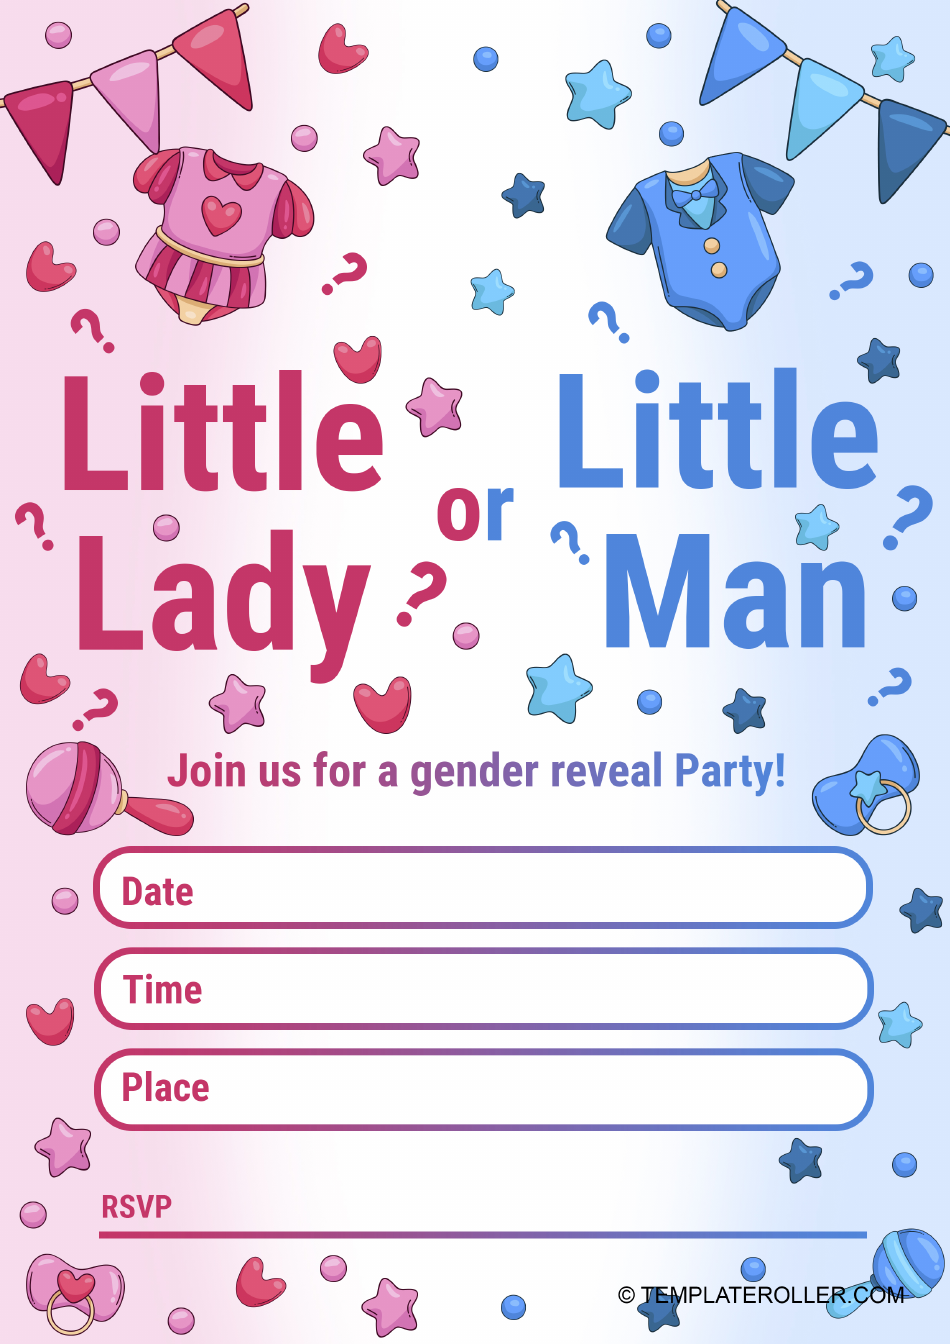 Gender Reveal Invitation Template - Pink and Blue